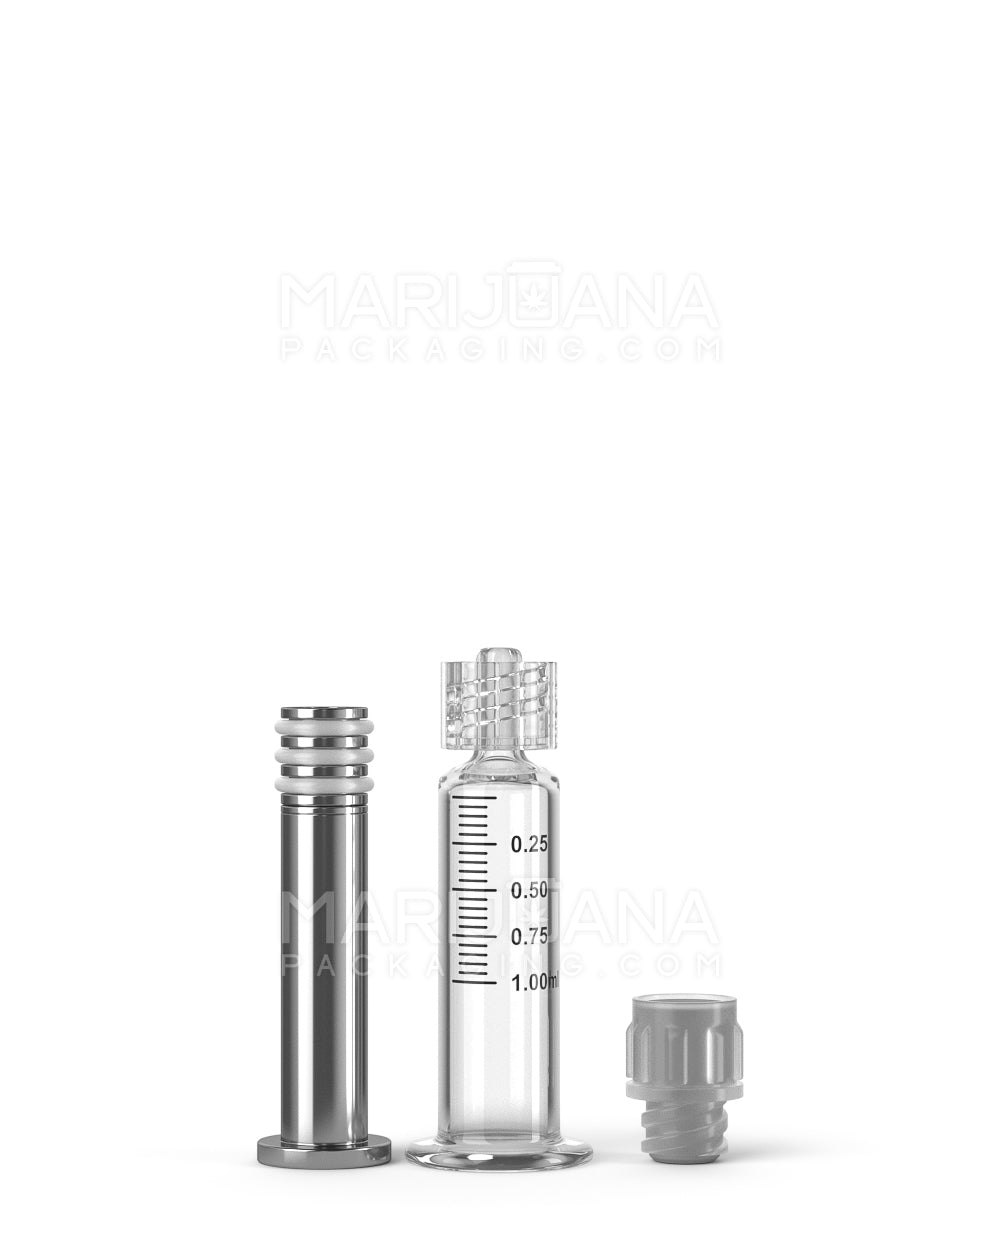 Luer Lock | Glass Dab Applicator Syringes w/ Metal Plunger | 1mL - 0.25mL Increments - 100 Count - 3